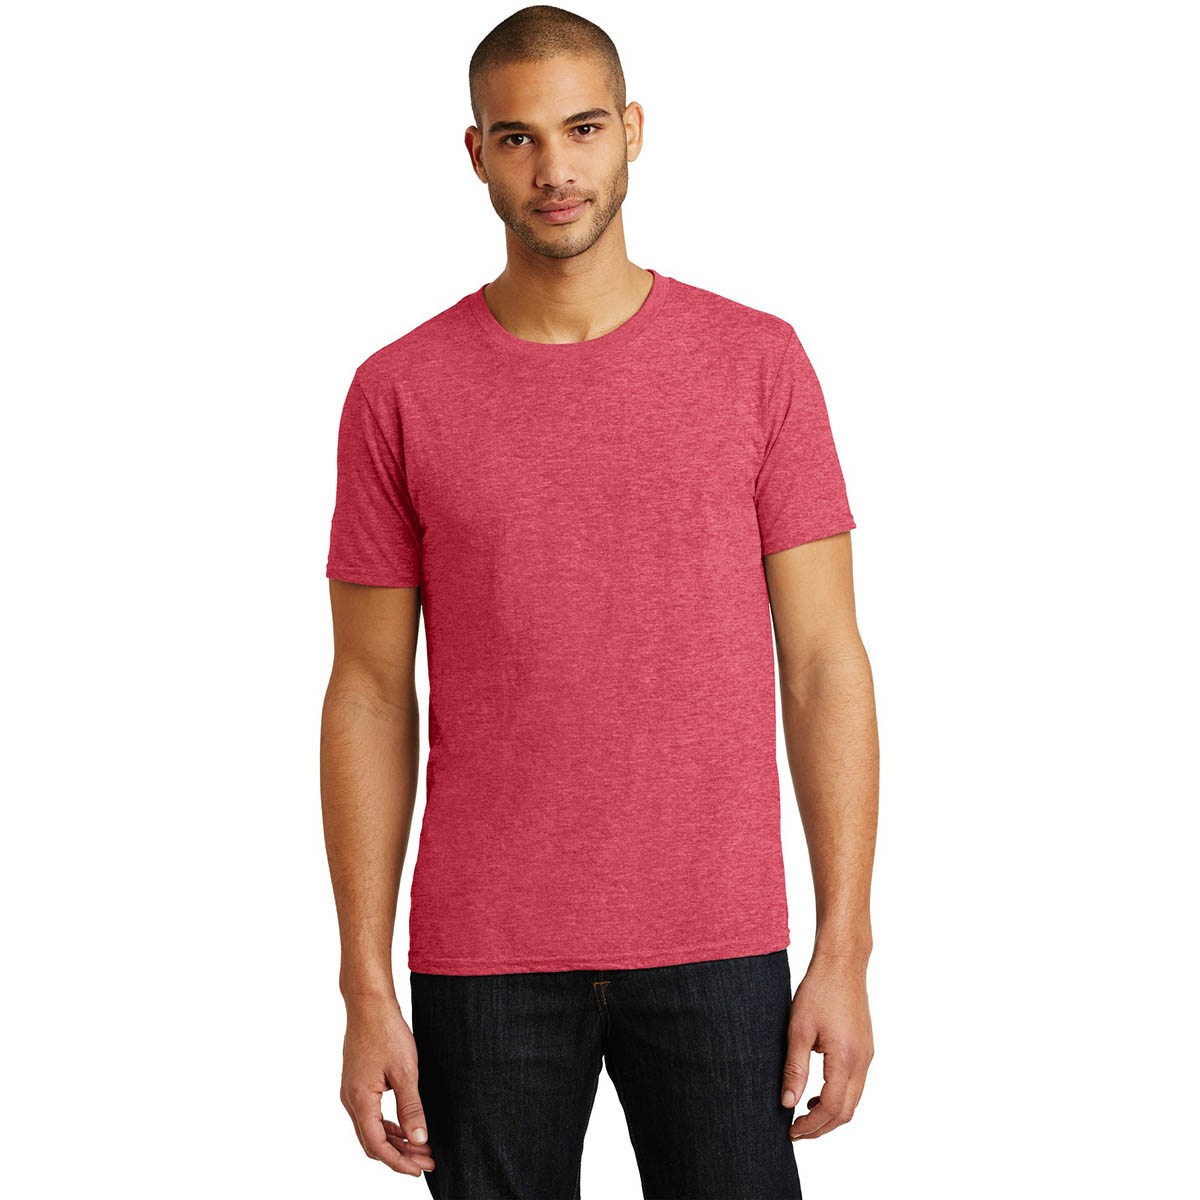 heather red t shirt